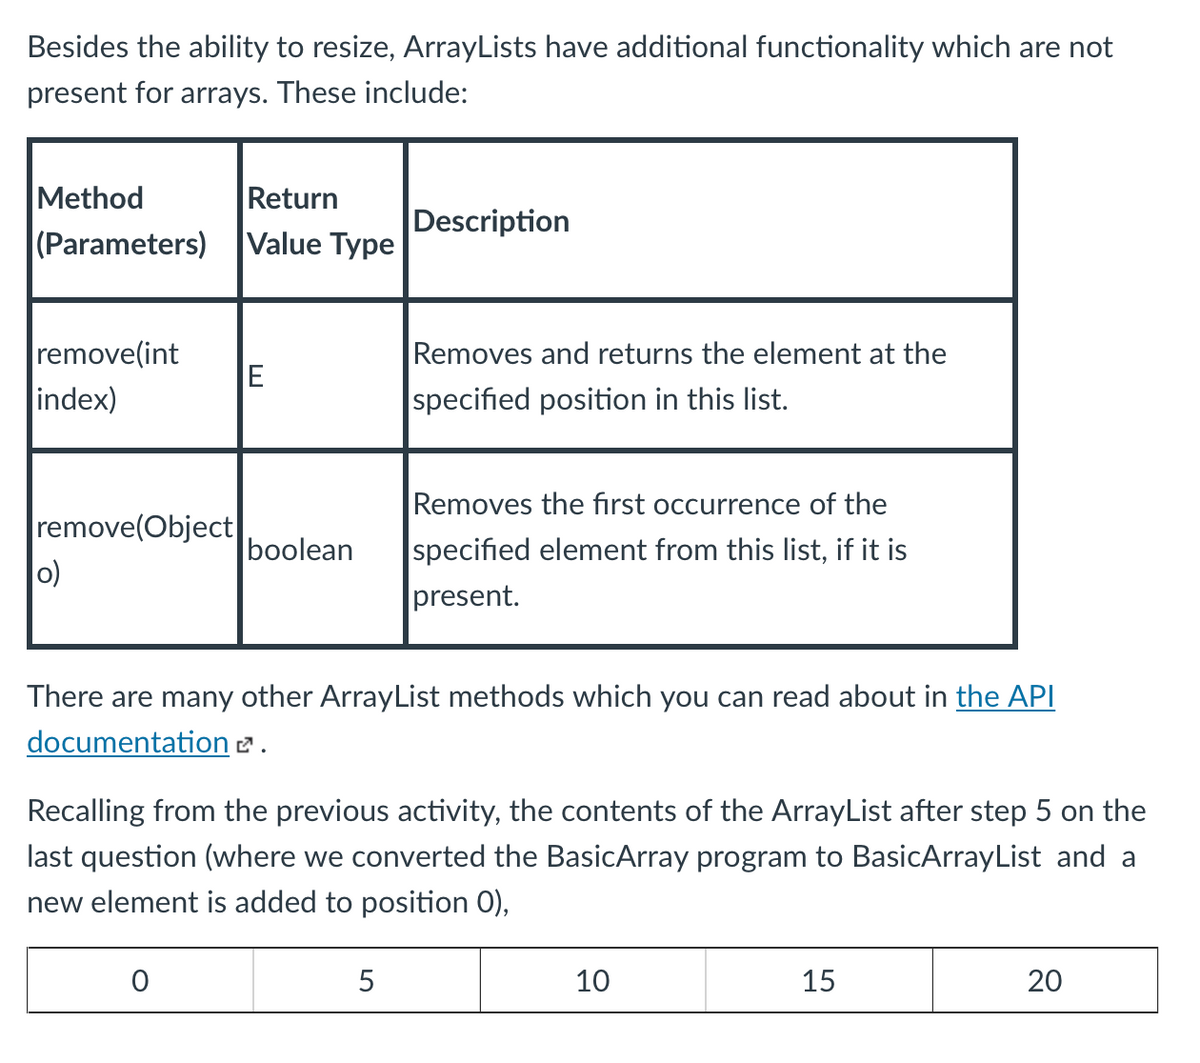 Besides the ability to resize, ArrayLists have additional functionality which are not
present for arrays. These include:
Method
Return
Description
(Parameters)
Value Type
remove(int
index)
E
Removes and returns the element at the
specified position in this list.
remove(Object
boolean
Removes the first occurrence of the
specified element from this list, if it is
present.
o)
There are many other ArrayList methods which you can read about in the API
documentation.
Recalling from the previous activity, the contents of the ArrayList after step 5 on the
last question (where we converted the BasicArray program to BasicArrayList and a
new element is added to position 0),
0
5
10
15
20